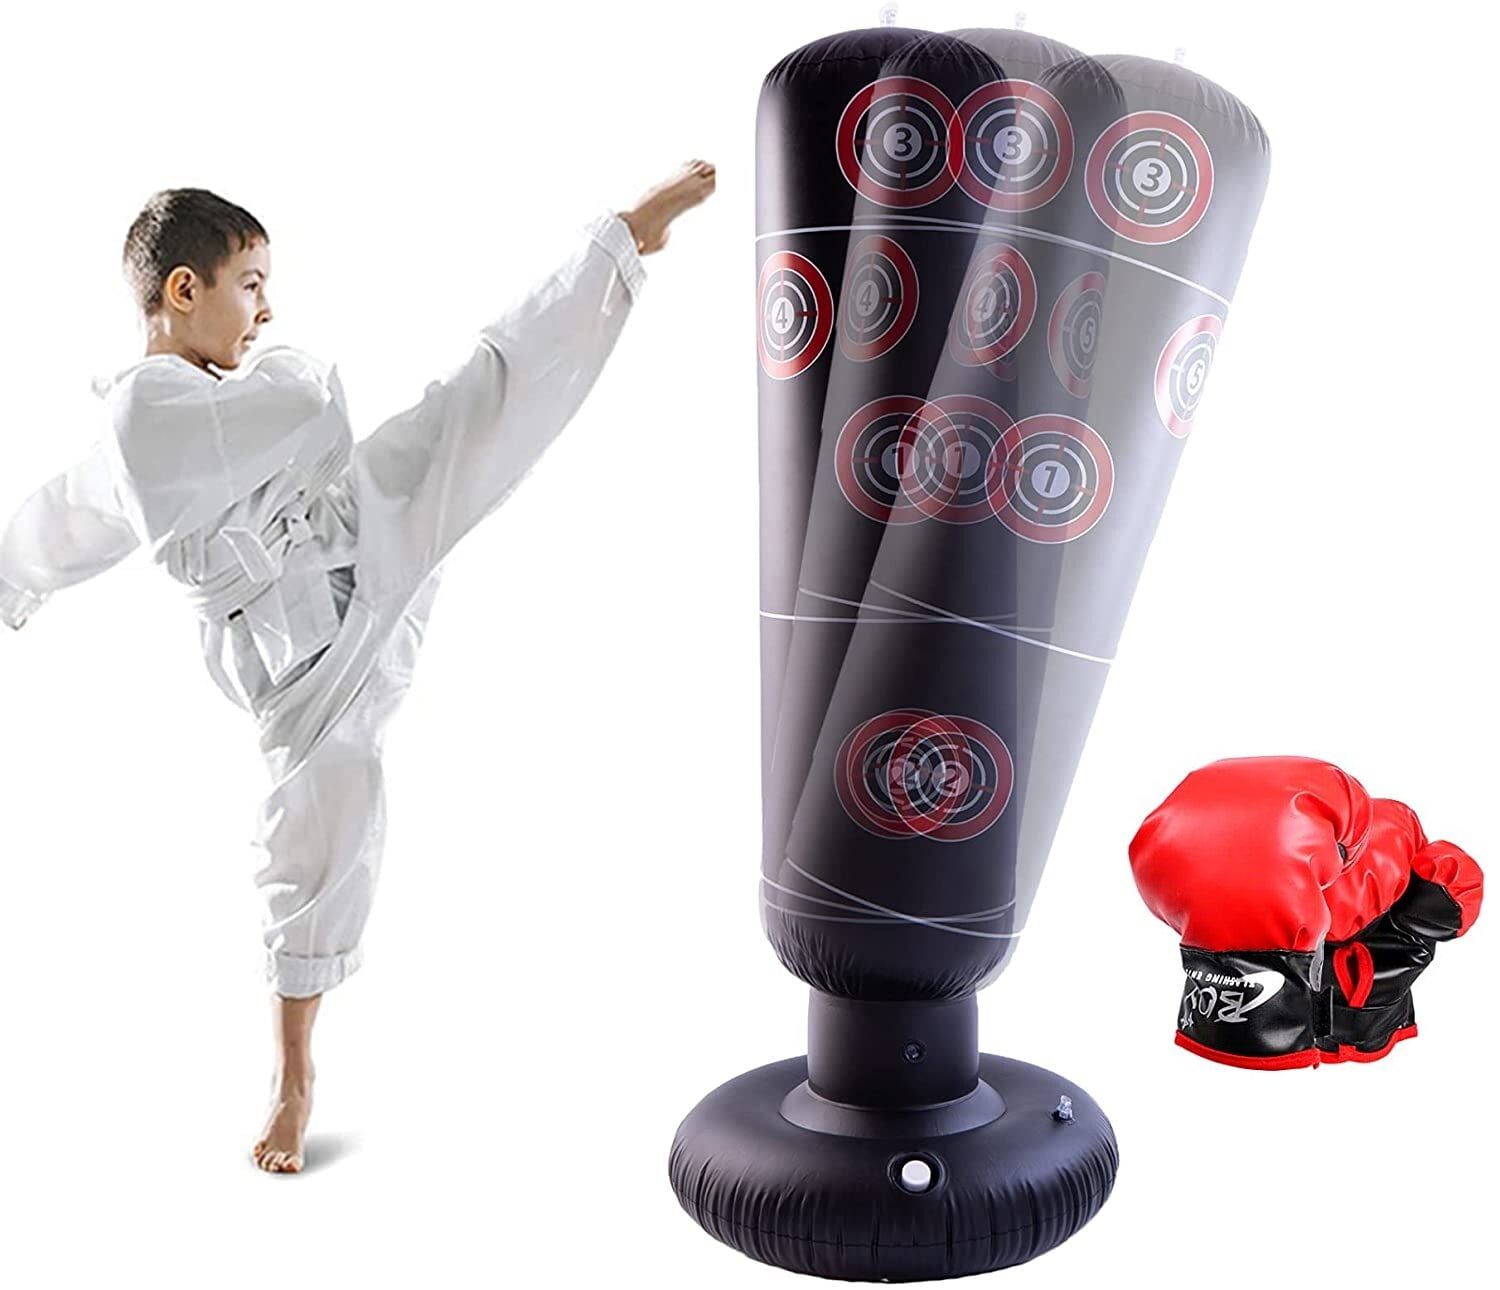 Inflatable Kids Punching Bag MMA and to Relief Stress or Anger in Kids and Adults Taekwondo 63inch Free Standing Boxing Bag Punching Bag with Stand for Practicing Karate 